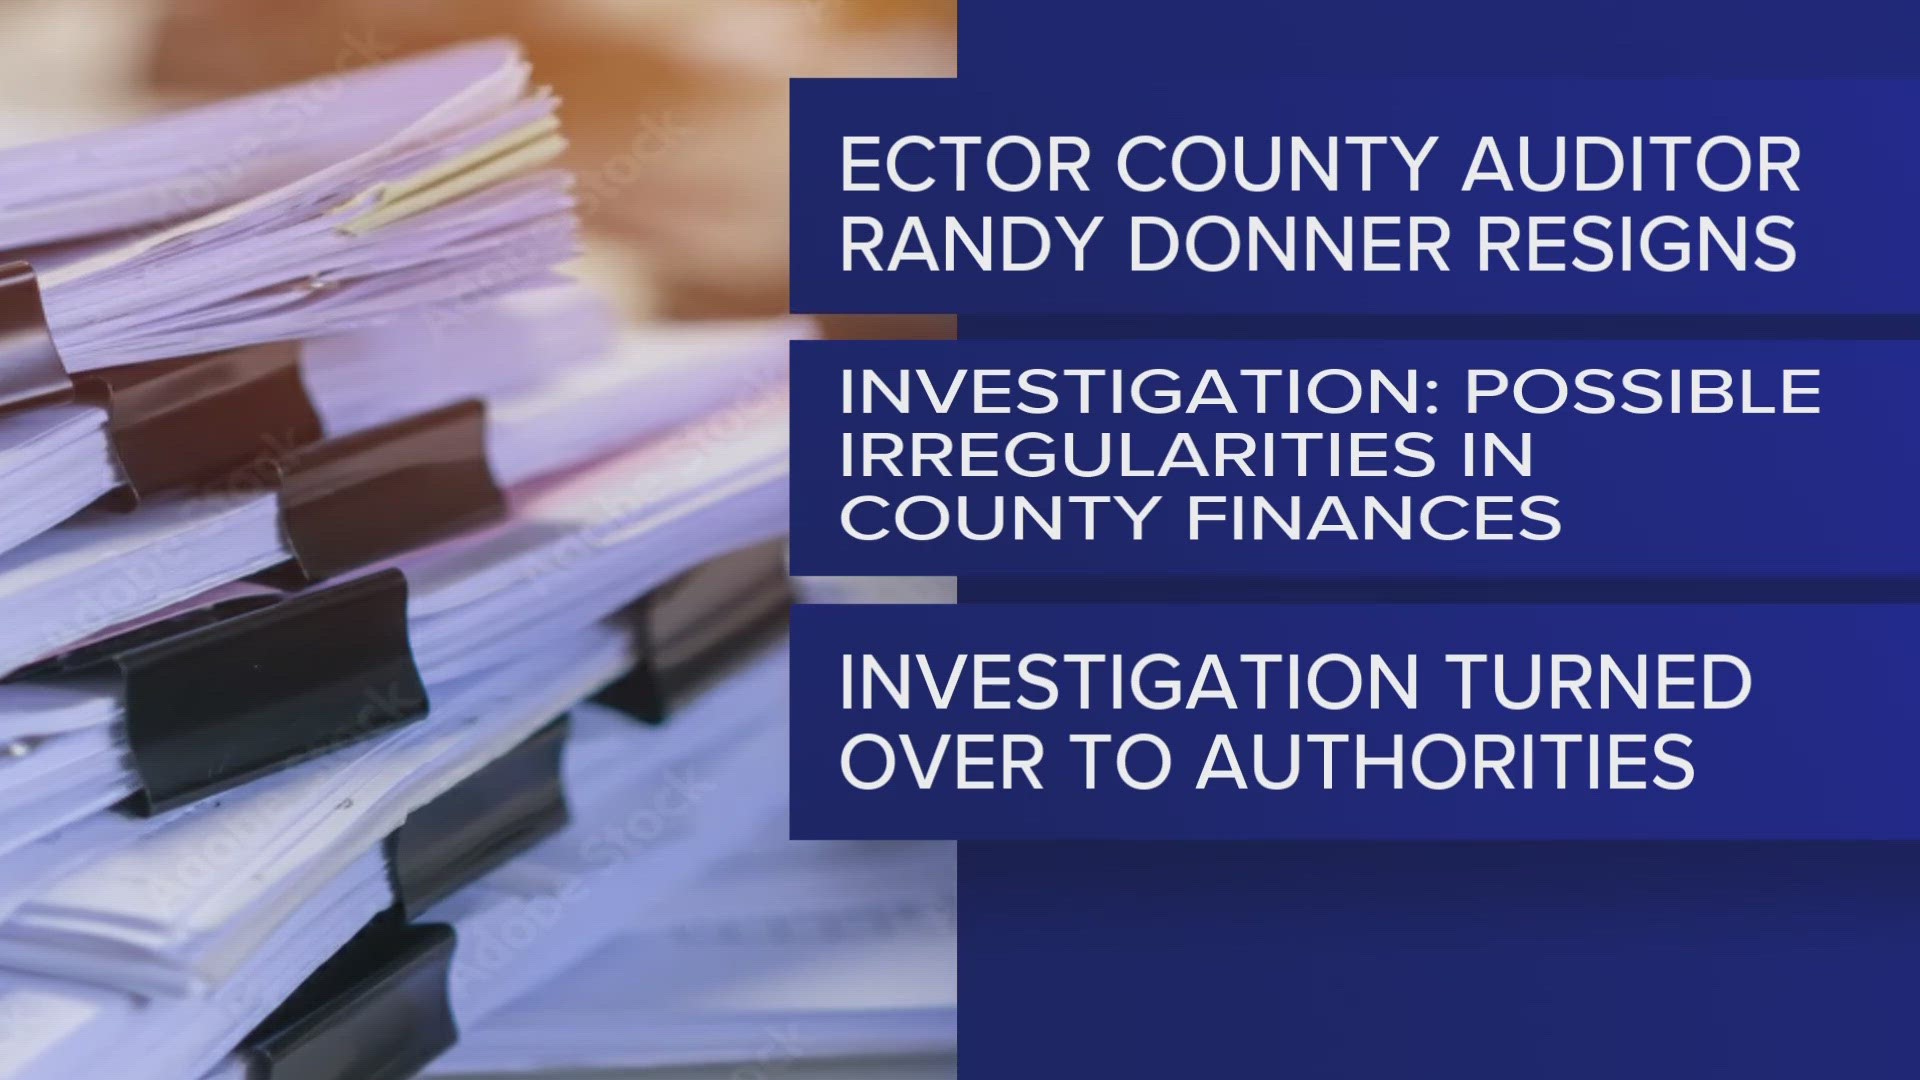 Ector County Judge Dustin Fawcett said the matter has been turned over to the proper authorities.